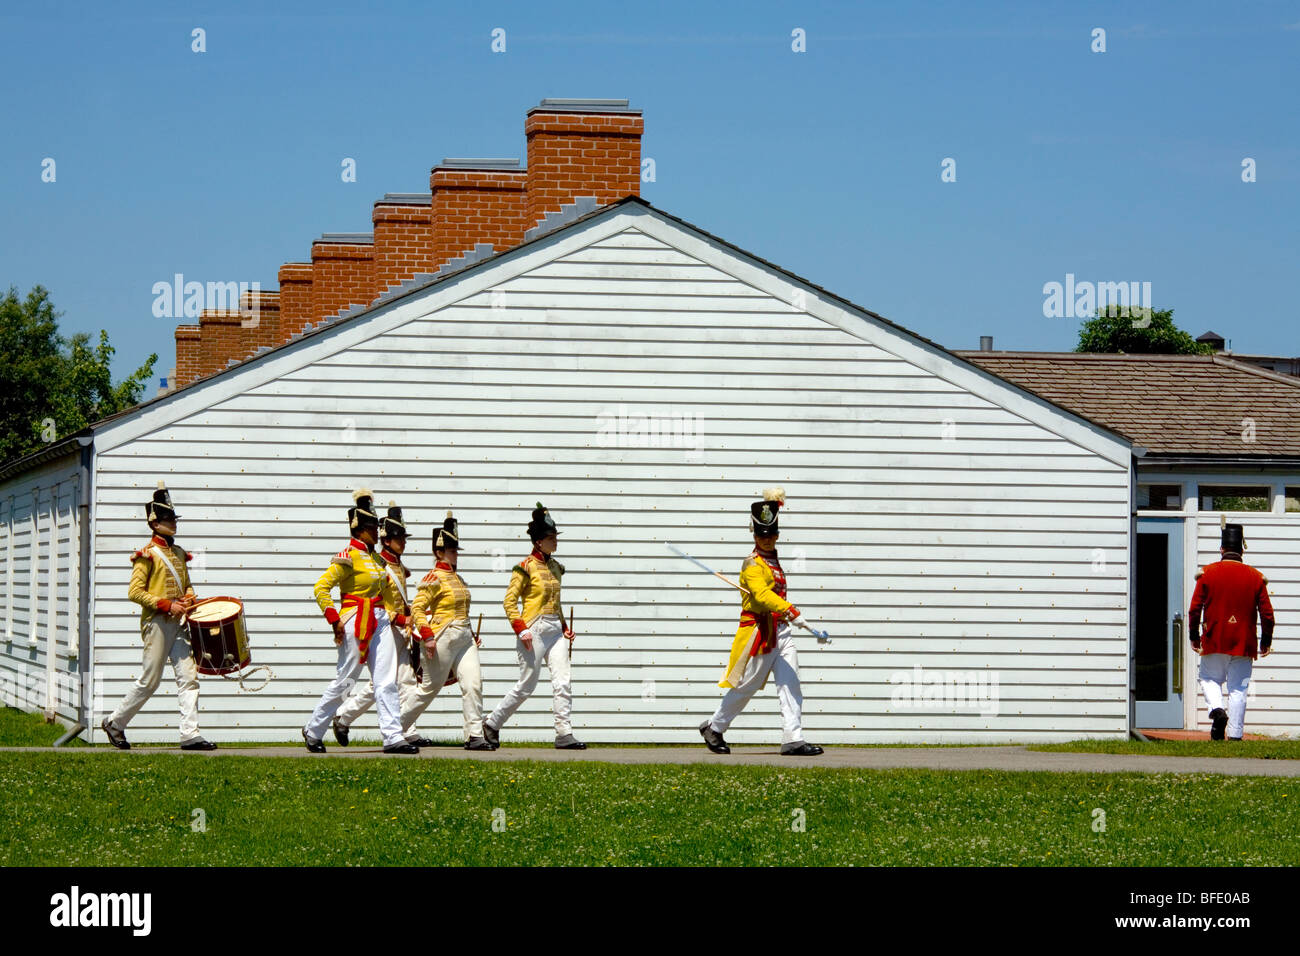 Fife and drum marching band, Fort York, Toronto, Canada Stock Photo